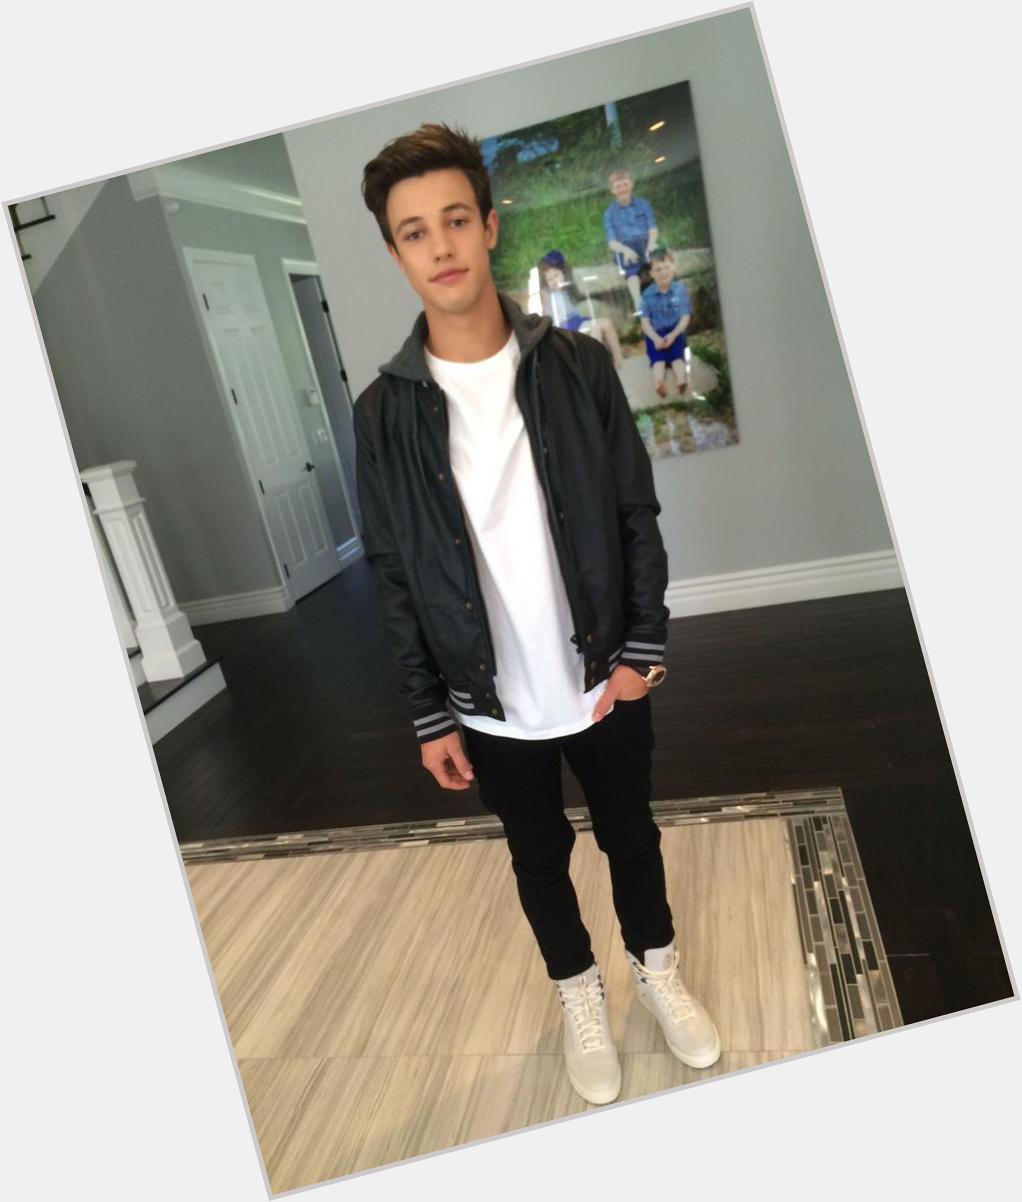 HAPPY BIRTHDAY TO THE ONE AND ONLY BEAUTIFUL CAMERON DALLAS  MA BABY IS 21... HES GETTING OLD 